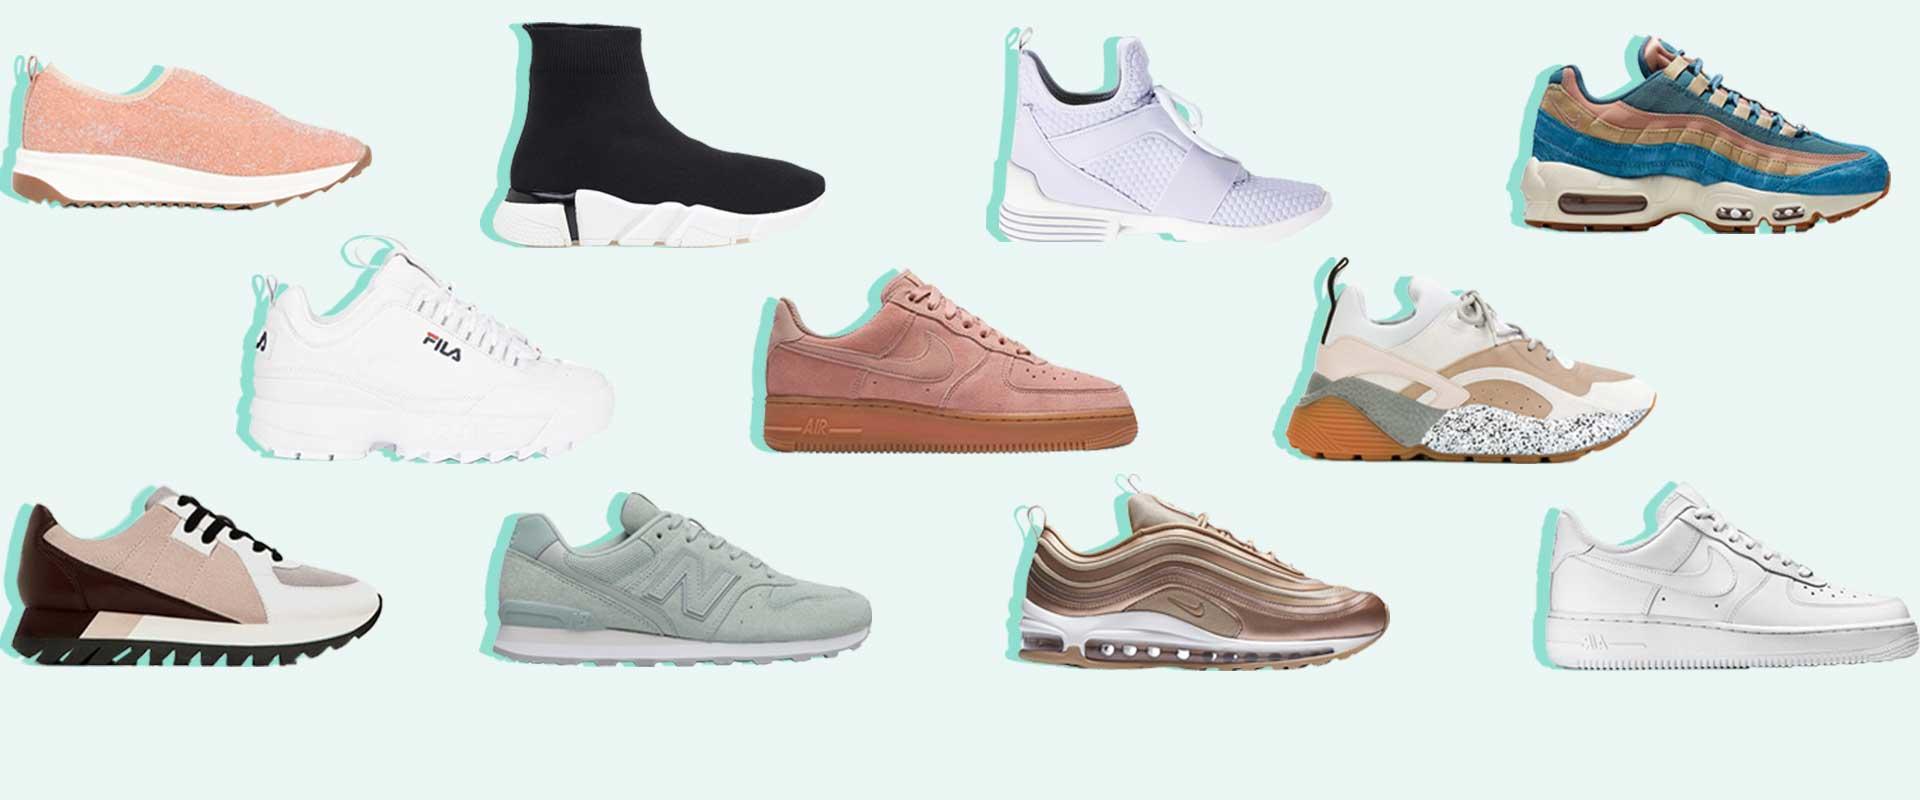 most wanted sneakers 2018